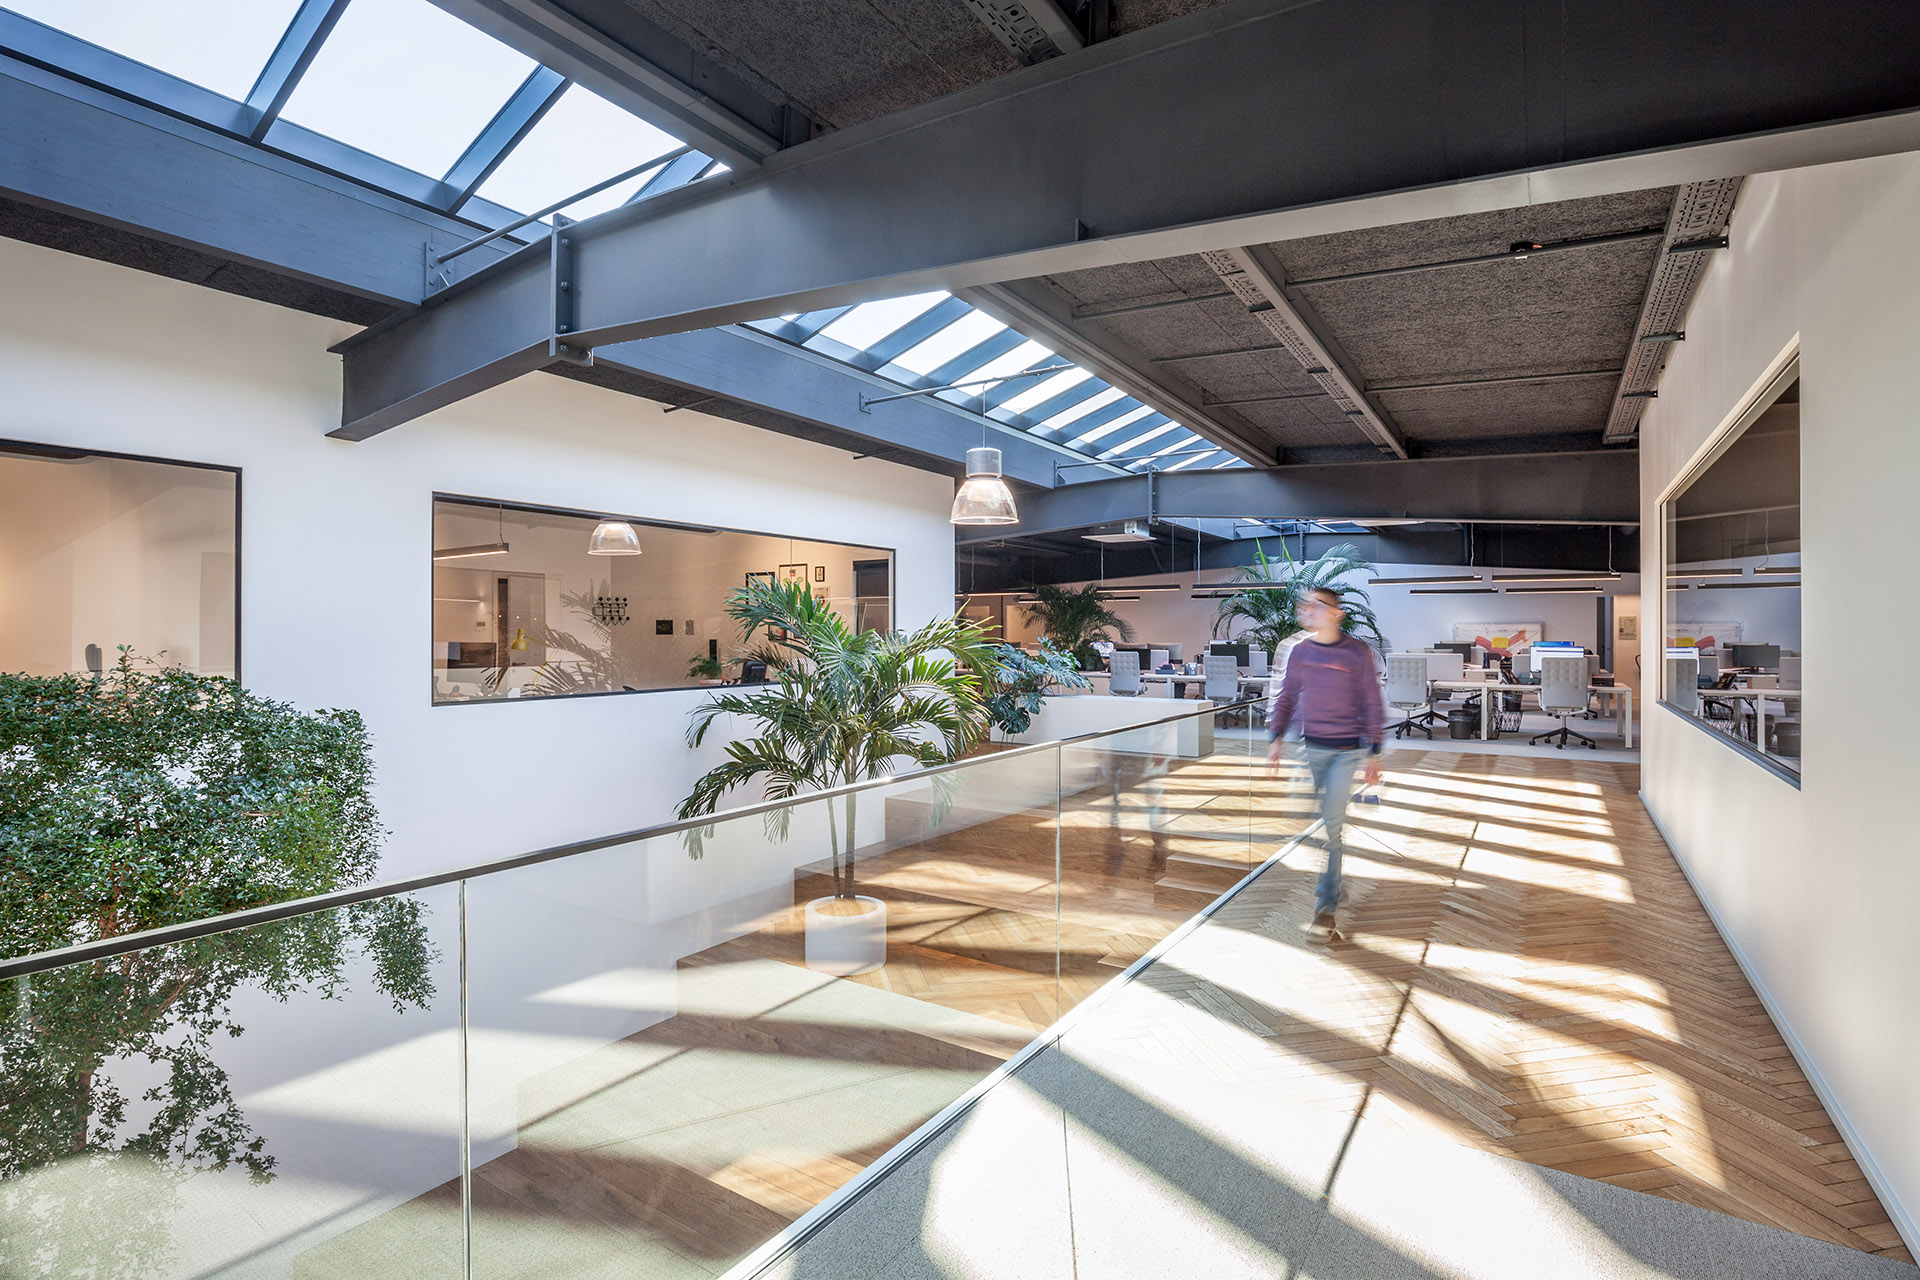 Warehouse transformed into an office. The workspace is flooded with natural light